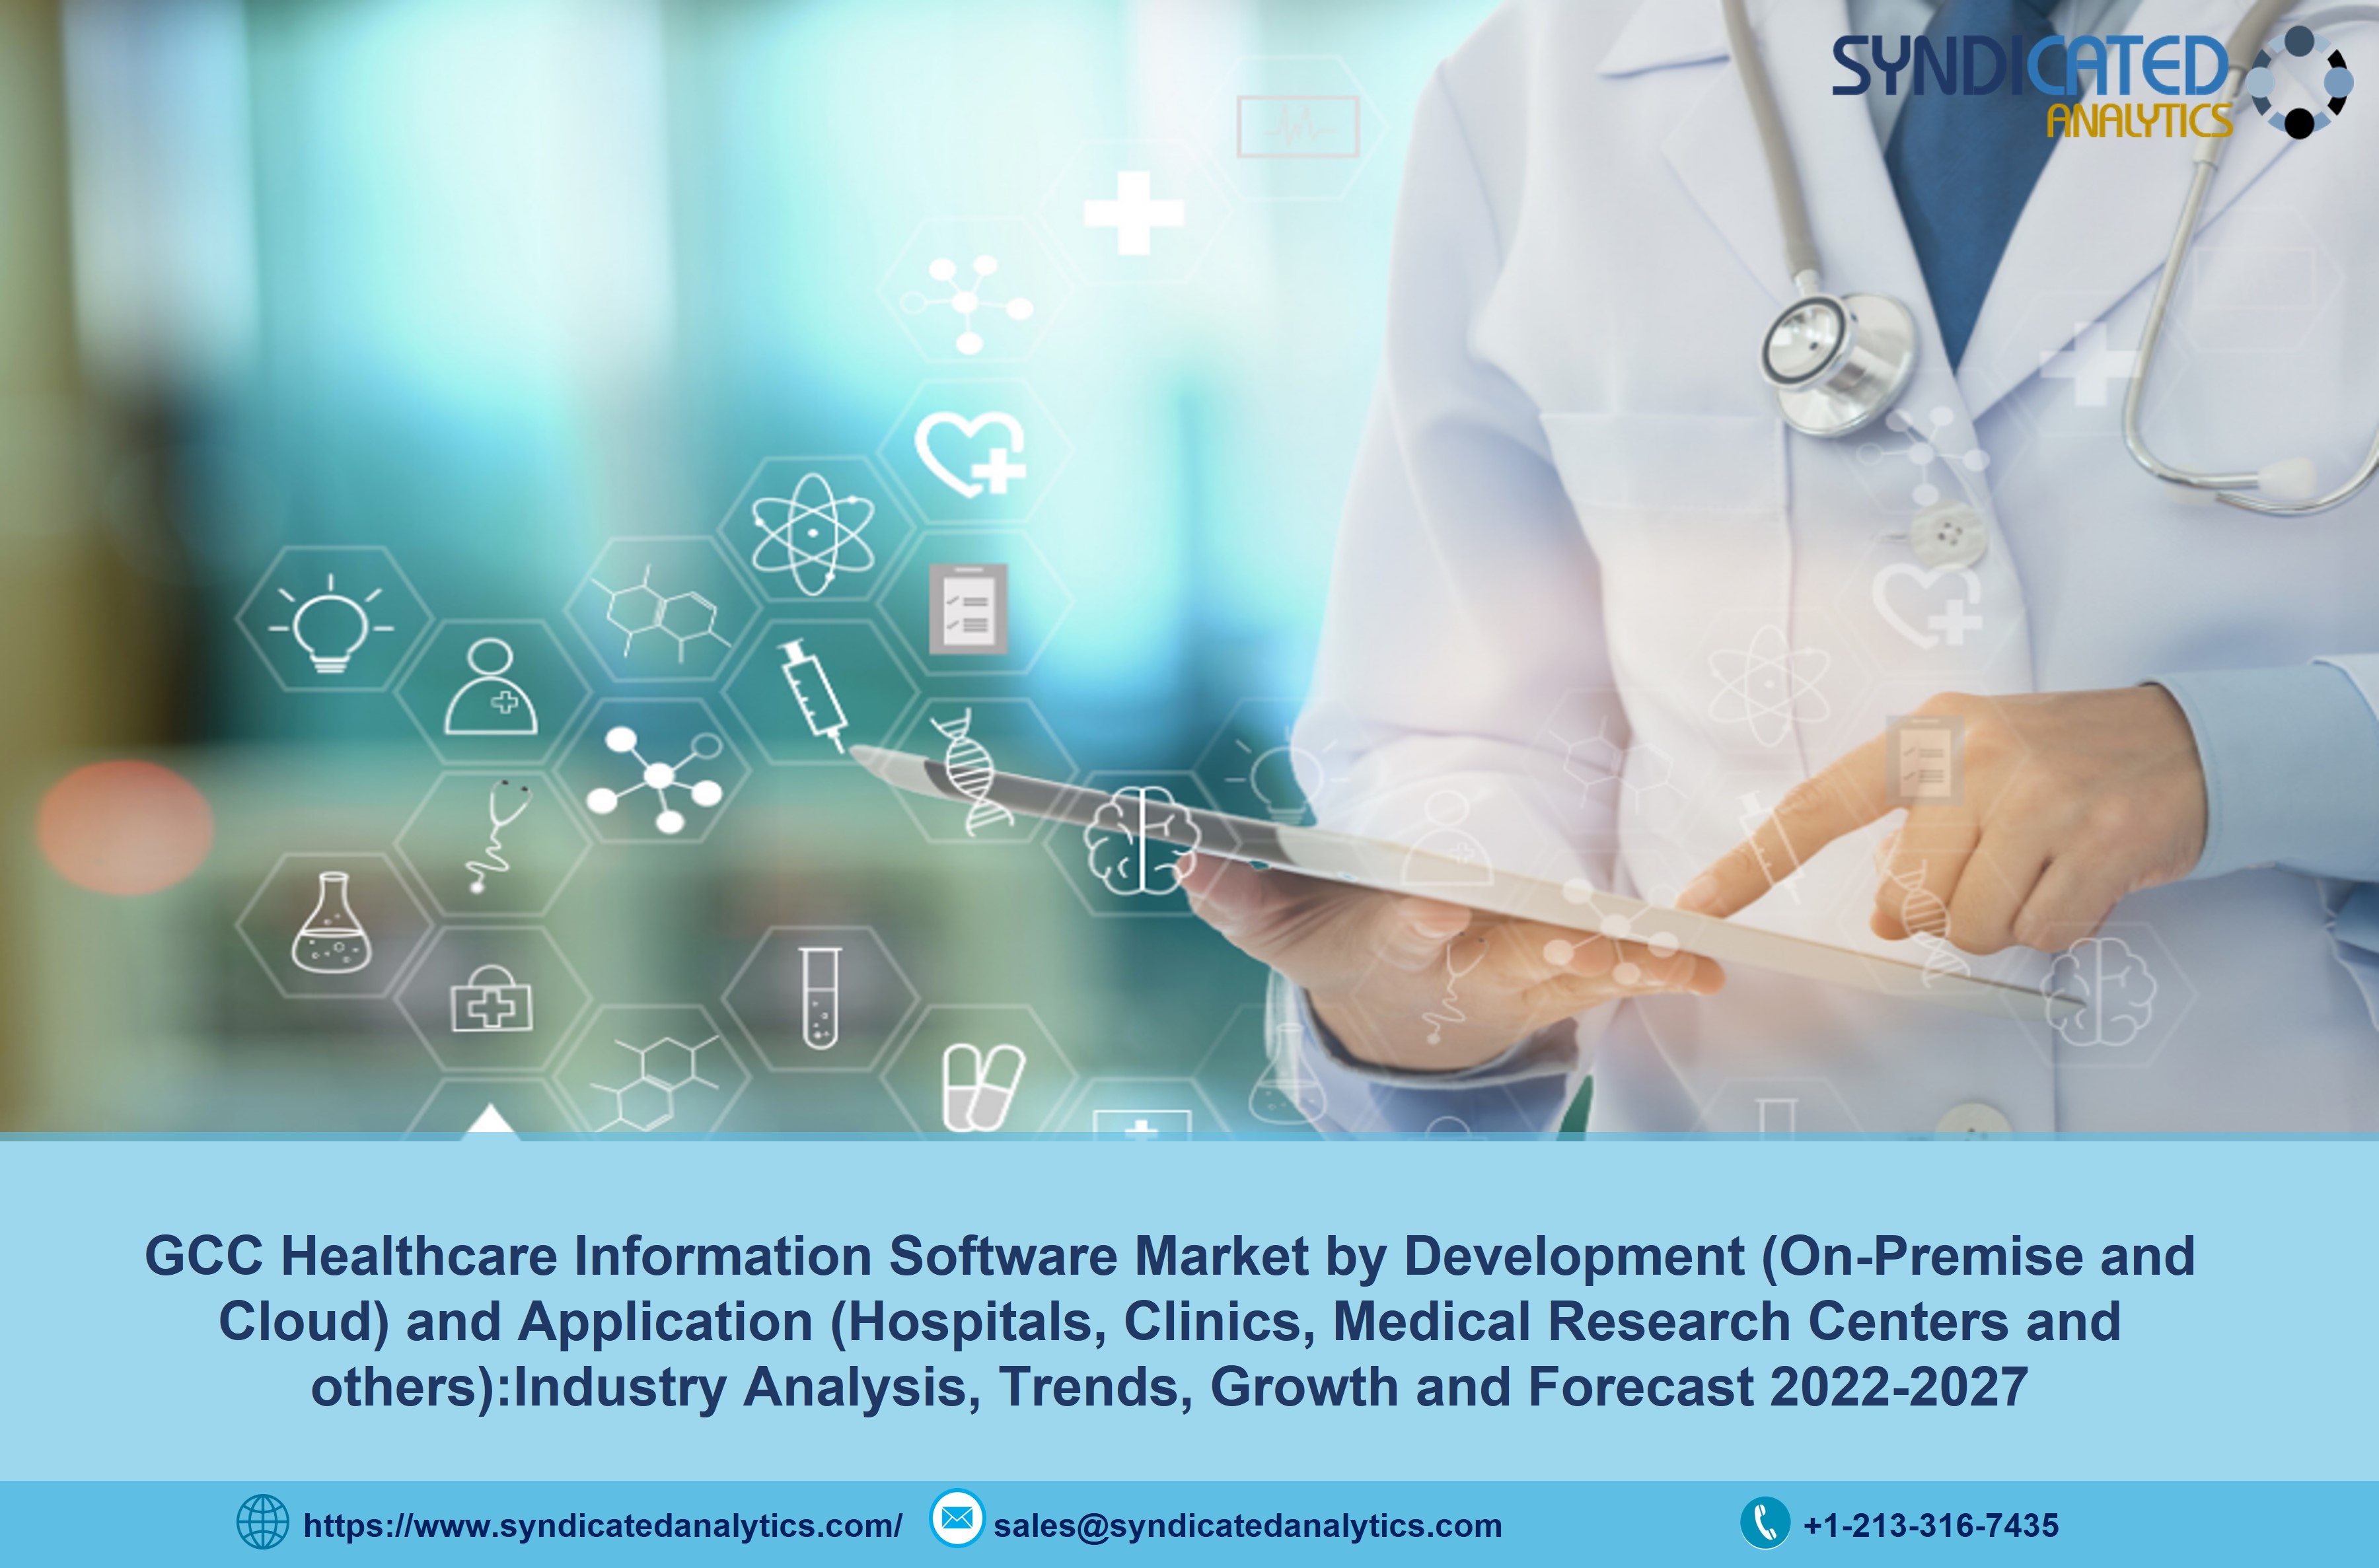 GCC Healthcare Information Software Market Share 2022: Industry Analysis, Size, Price Trends, Growth, Opportunities, Demand and Forecast till 2027 | Syndicated Analytics